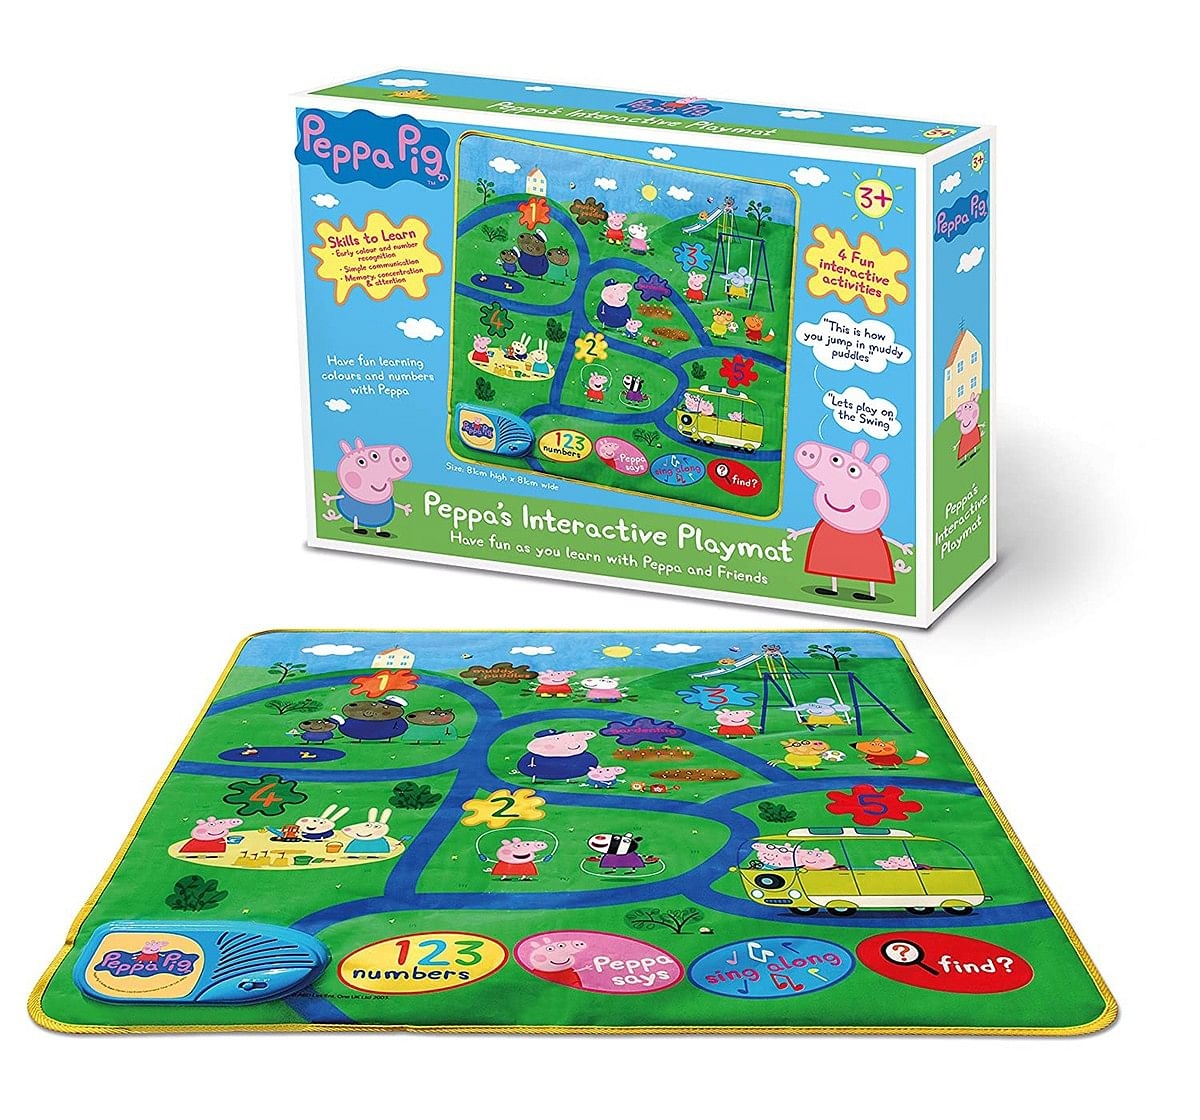 Peppa Pig Interactive Play Mat Baby Gear for Kids age 2Y+ 